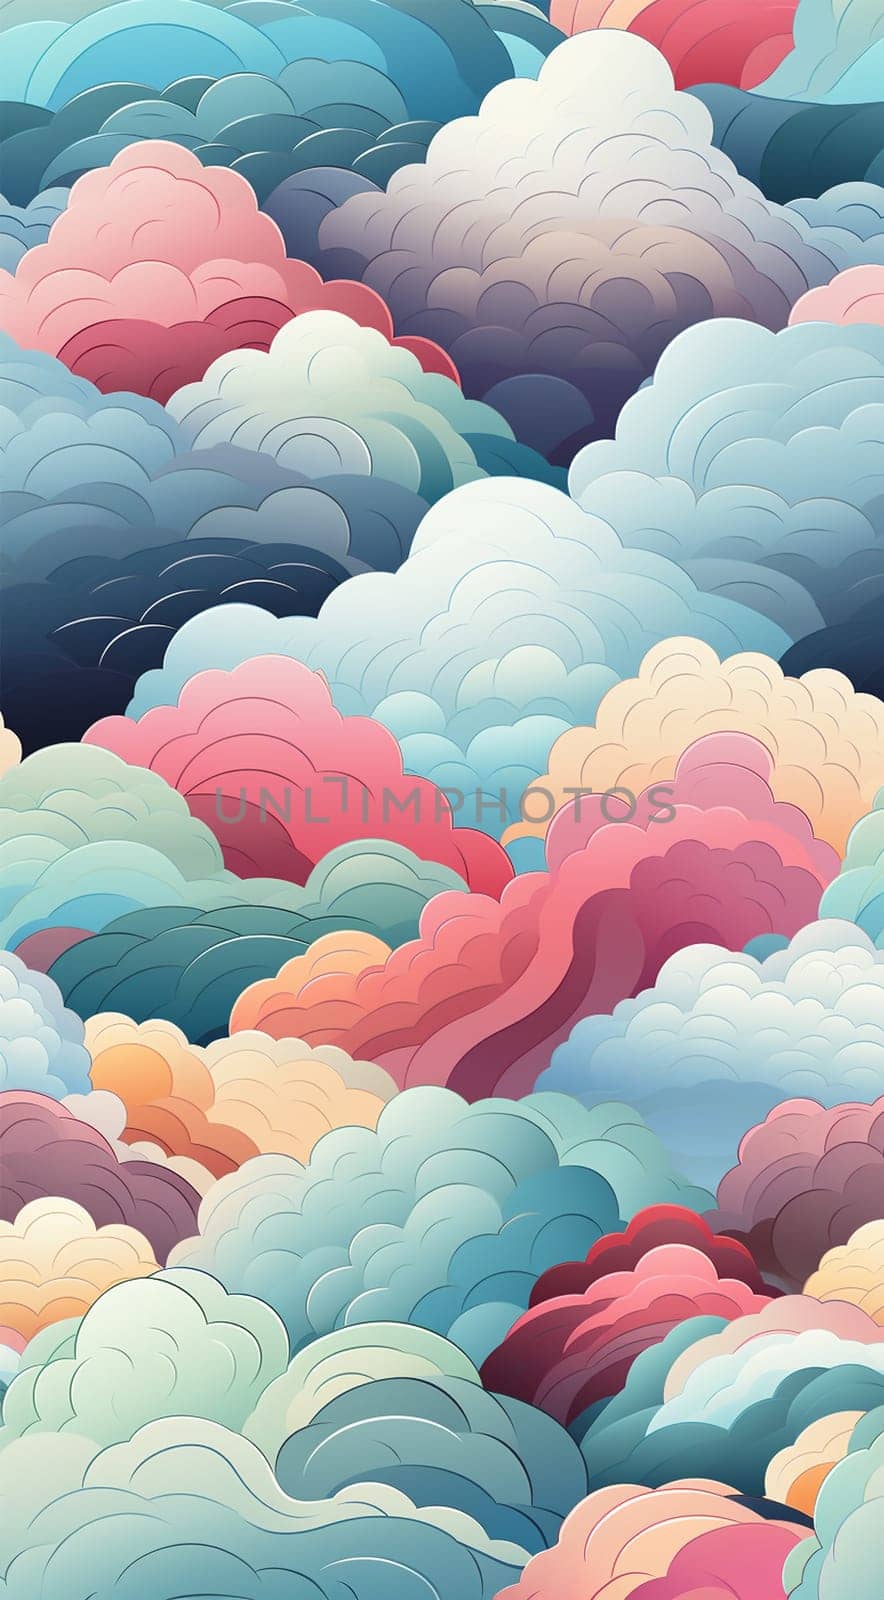 Cute colorful pastel clouds seamless pattern background. Rainbow unicorn background with clouds and stars. Pastel color sky. Magical landscape, abstract fabulous pattern. Cute candy wallpaper. by Annebel146